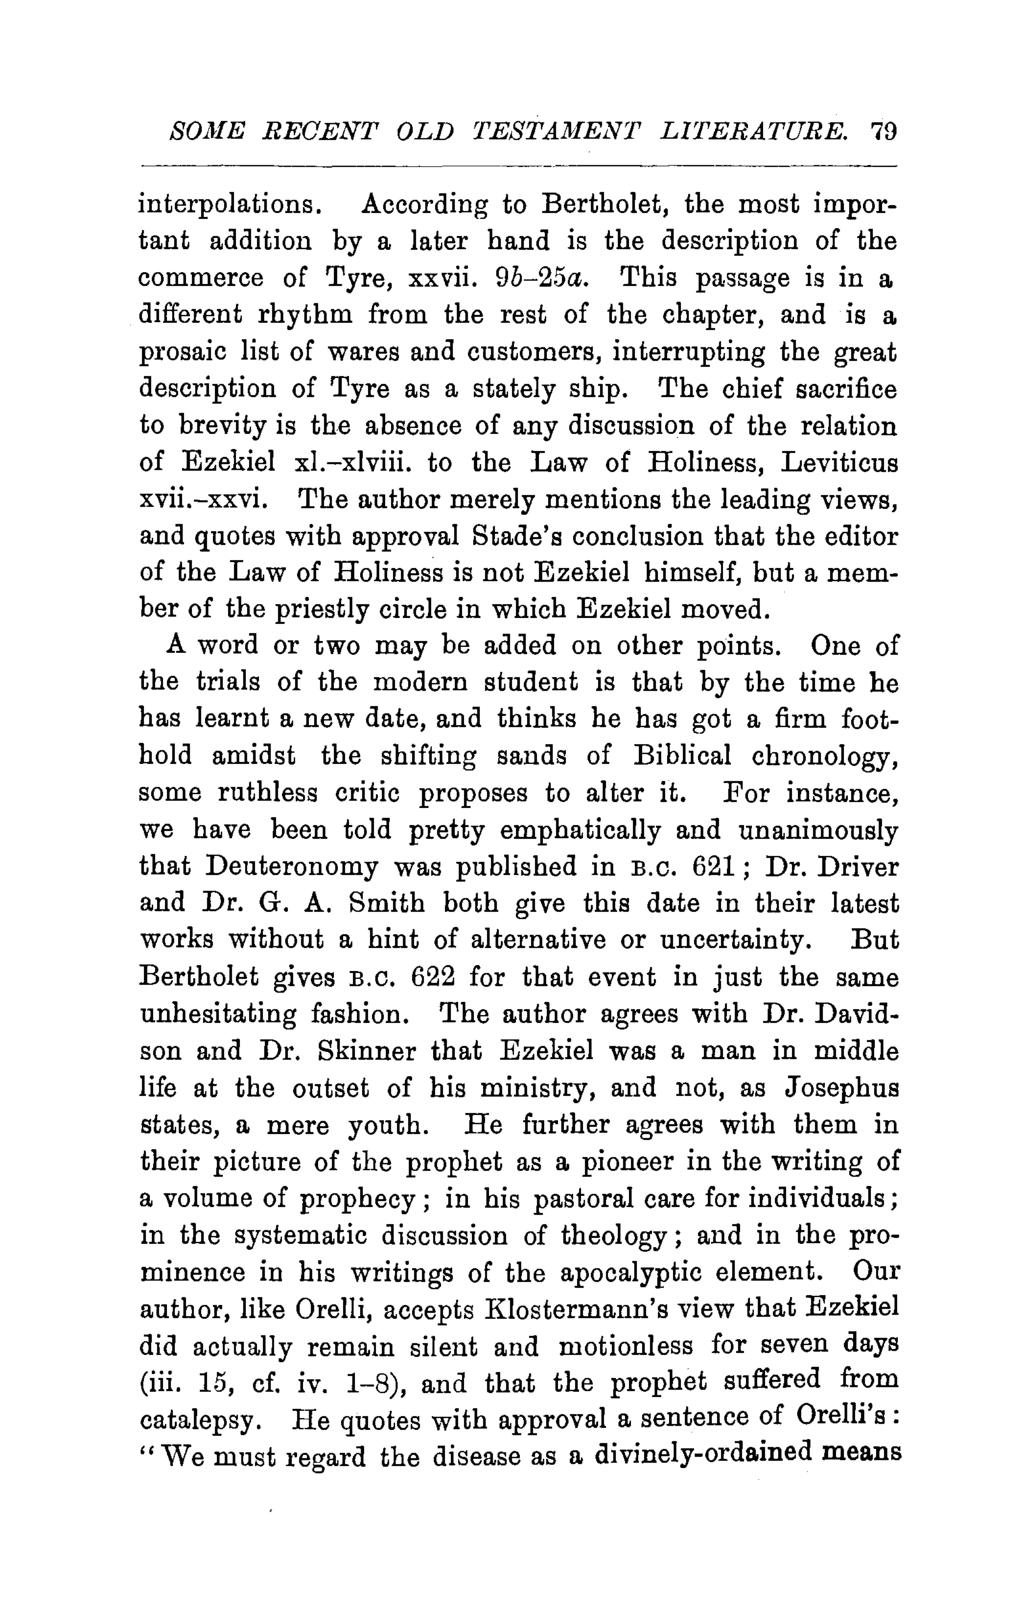 SOll-fE RECENT OLD TEST AMENT LITERATURE. 79 interpolations. According to Bertholet, the most important addition by a later hand is the description of the commerce of Tyre, xxvii. 9b-25a.